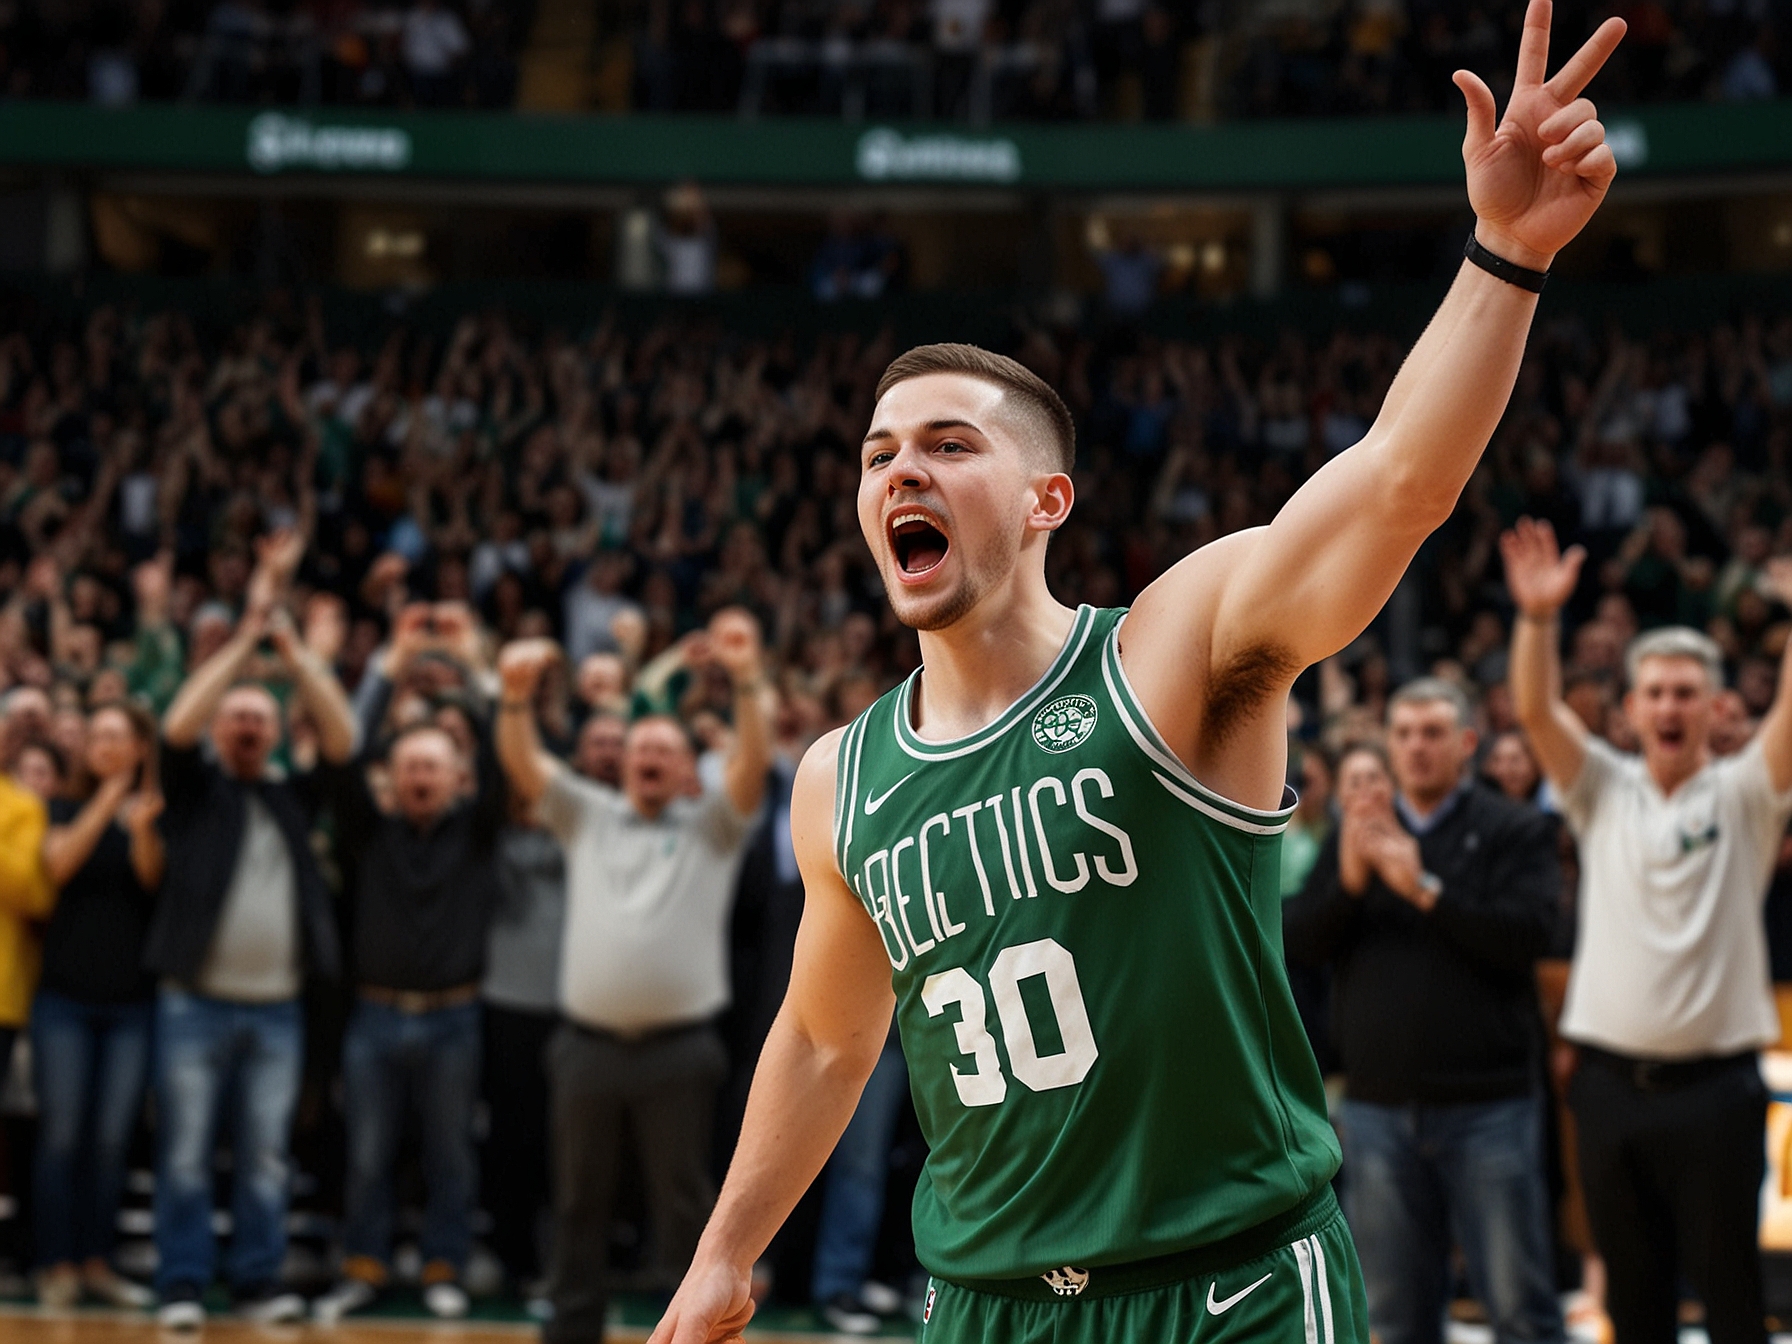 The crowd erupts into celebration as Celtics' guard Payton Pritchard sinks his remarkable three-pointer from beyond the half-court line, captured in a moment of pure basketball excitement.